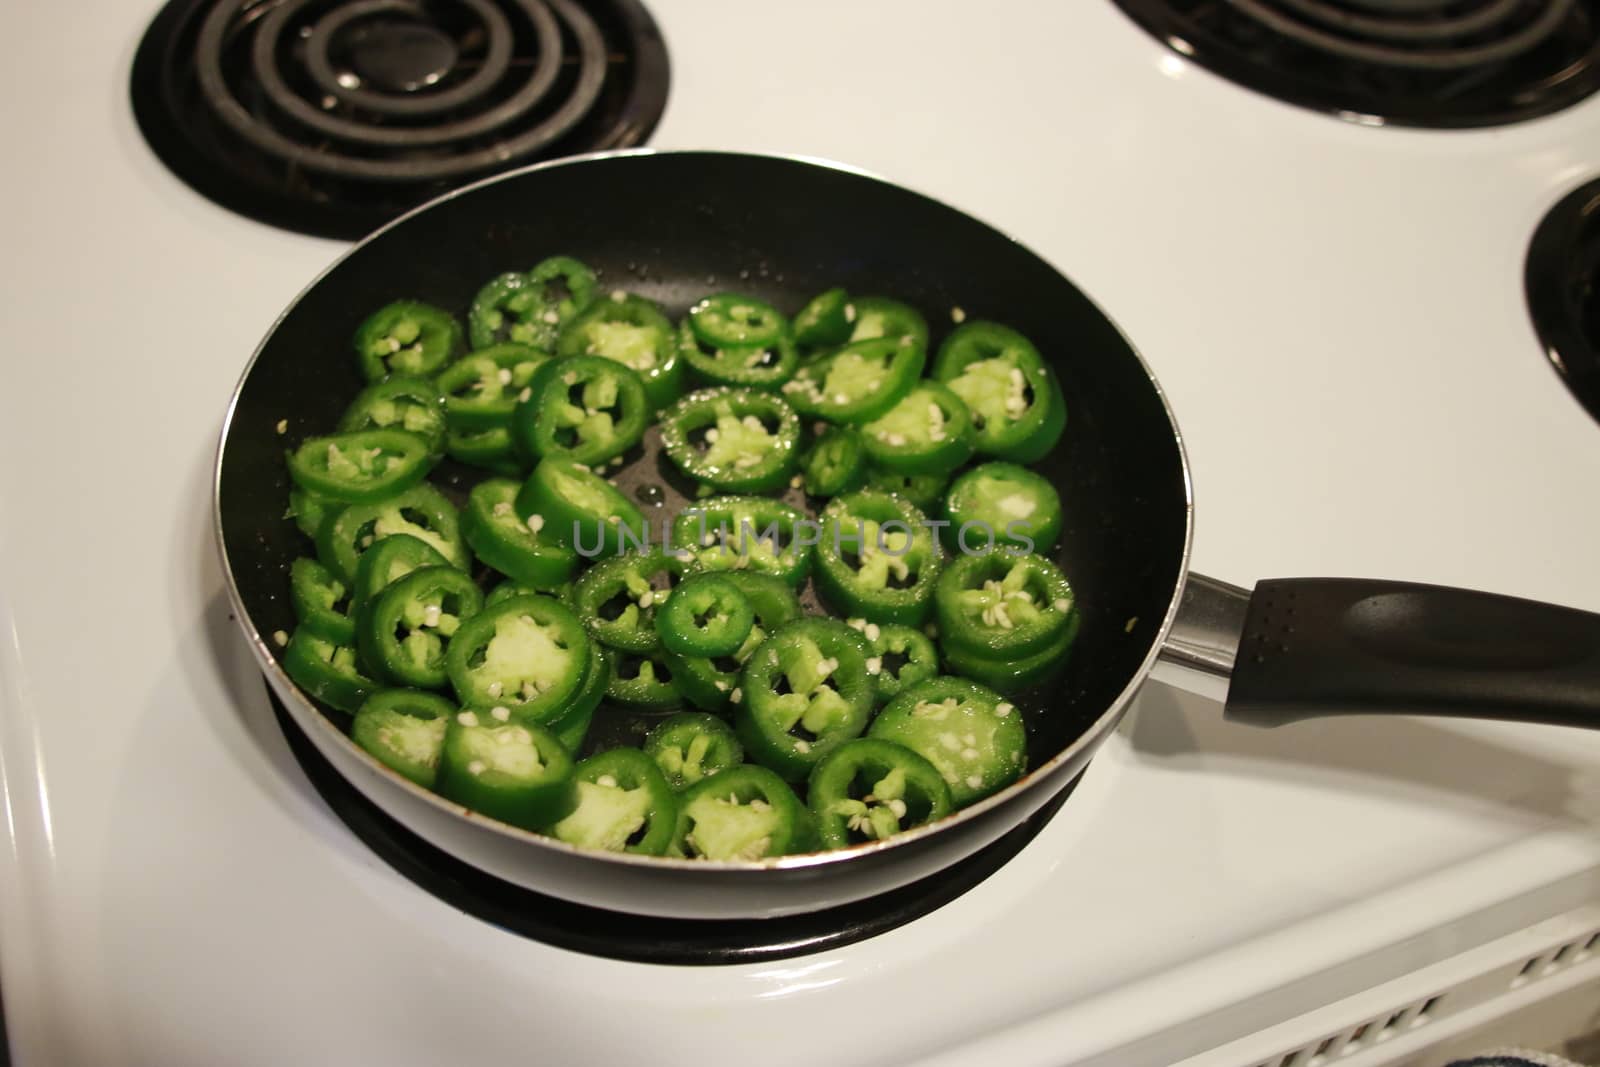 cooking jalapenos in a frying pan to make them for sandwiches by mynewturtle1